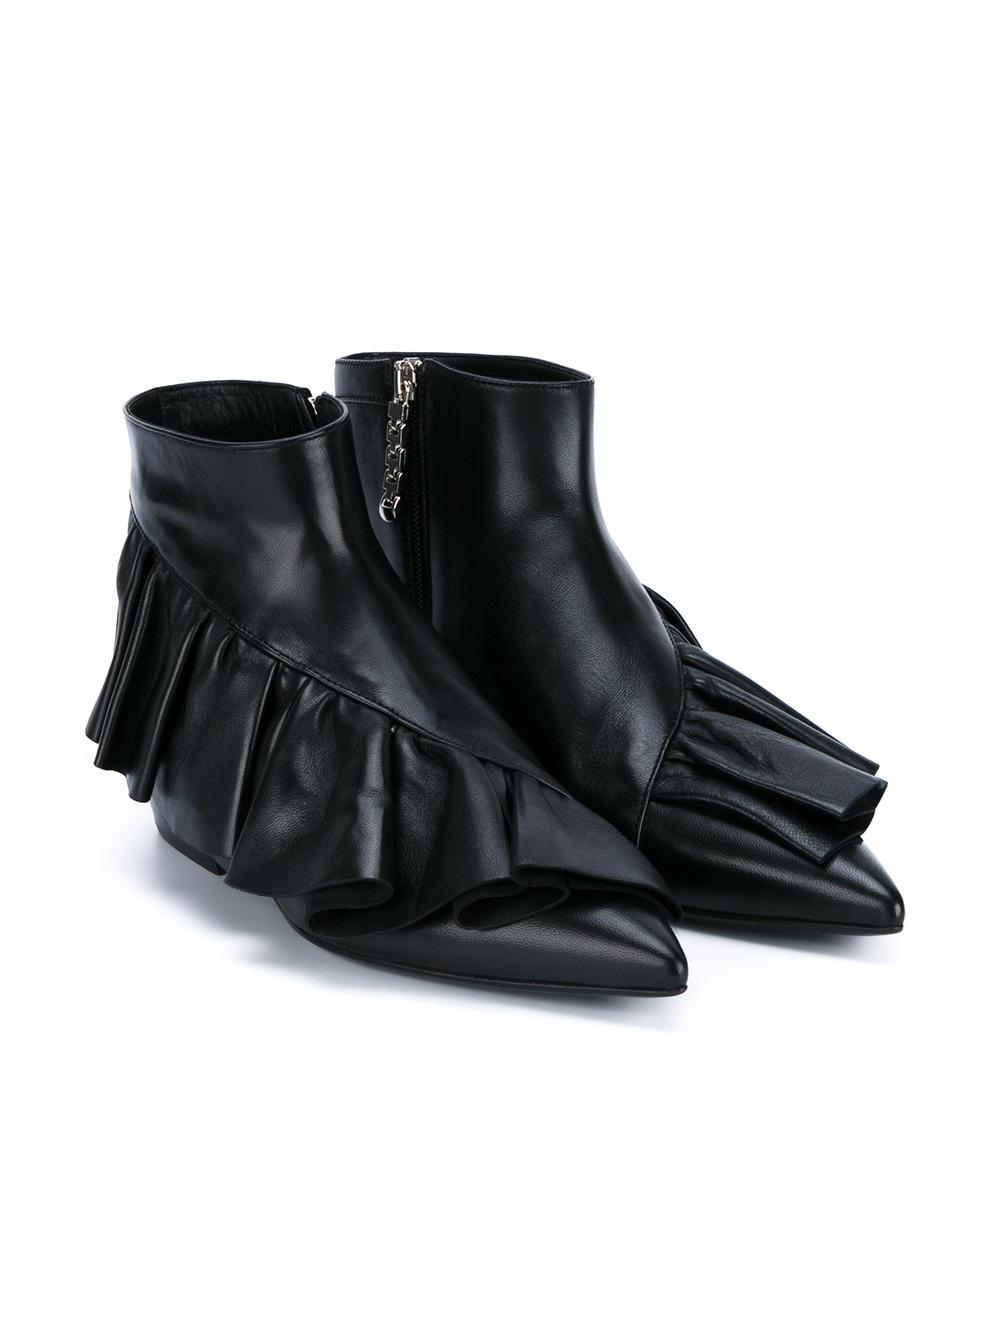 Lyst J.W.Anderson Ruffle Detail Boots in Black